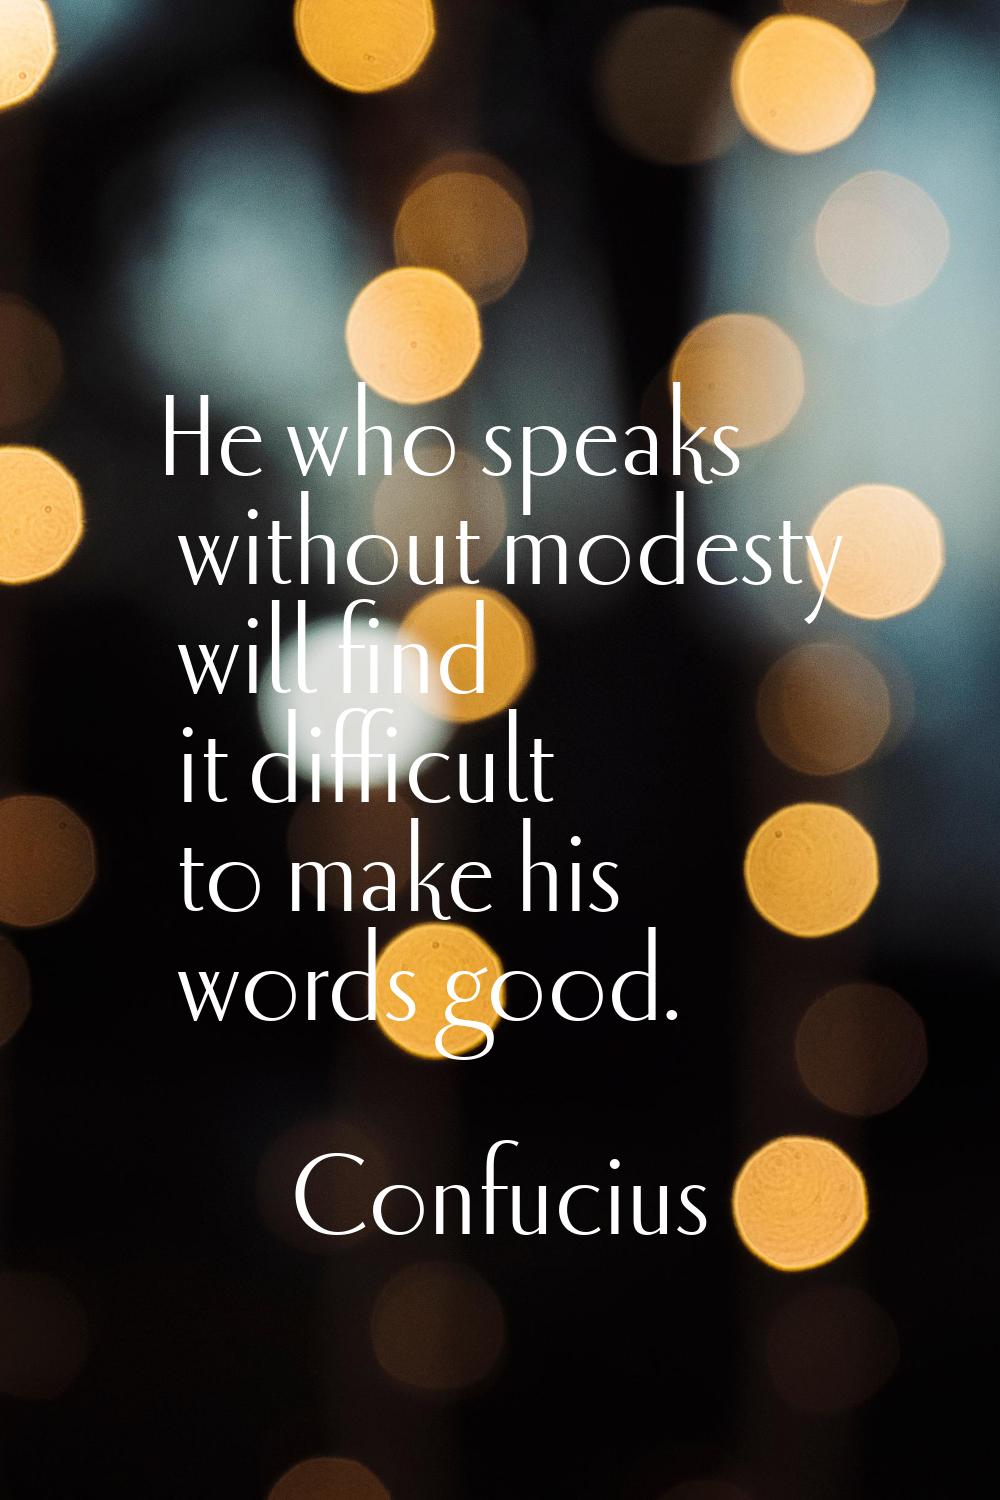 He who speaks without modesty will find it difficult to make his words good.